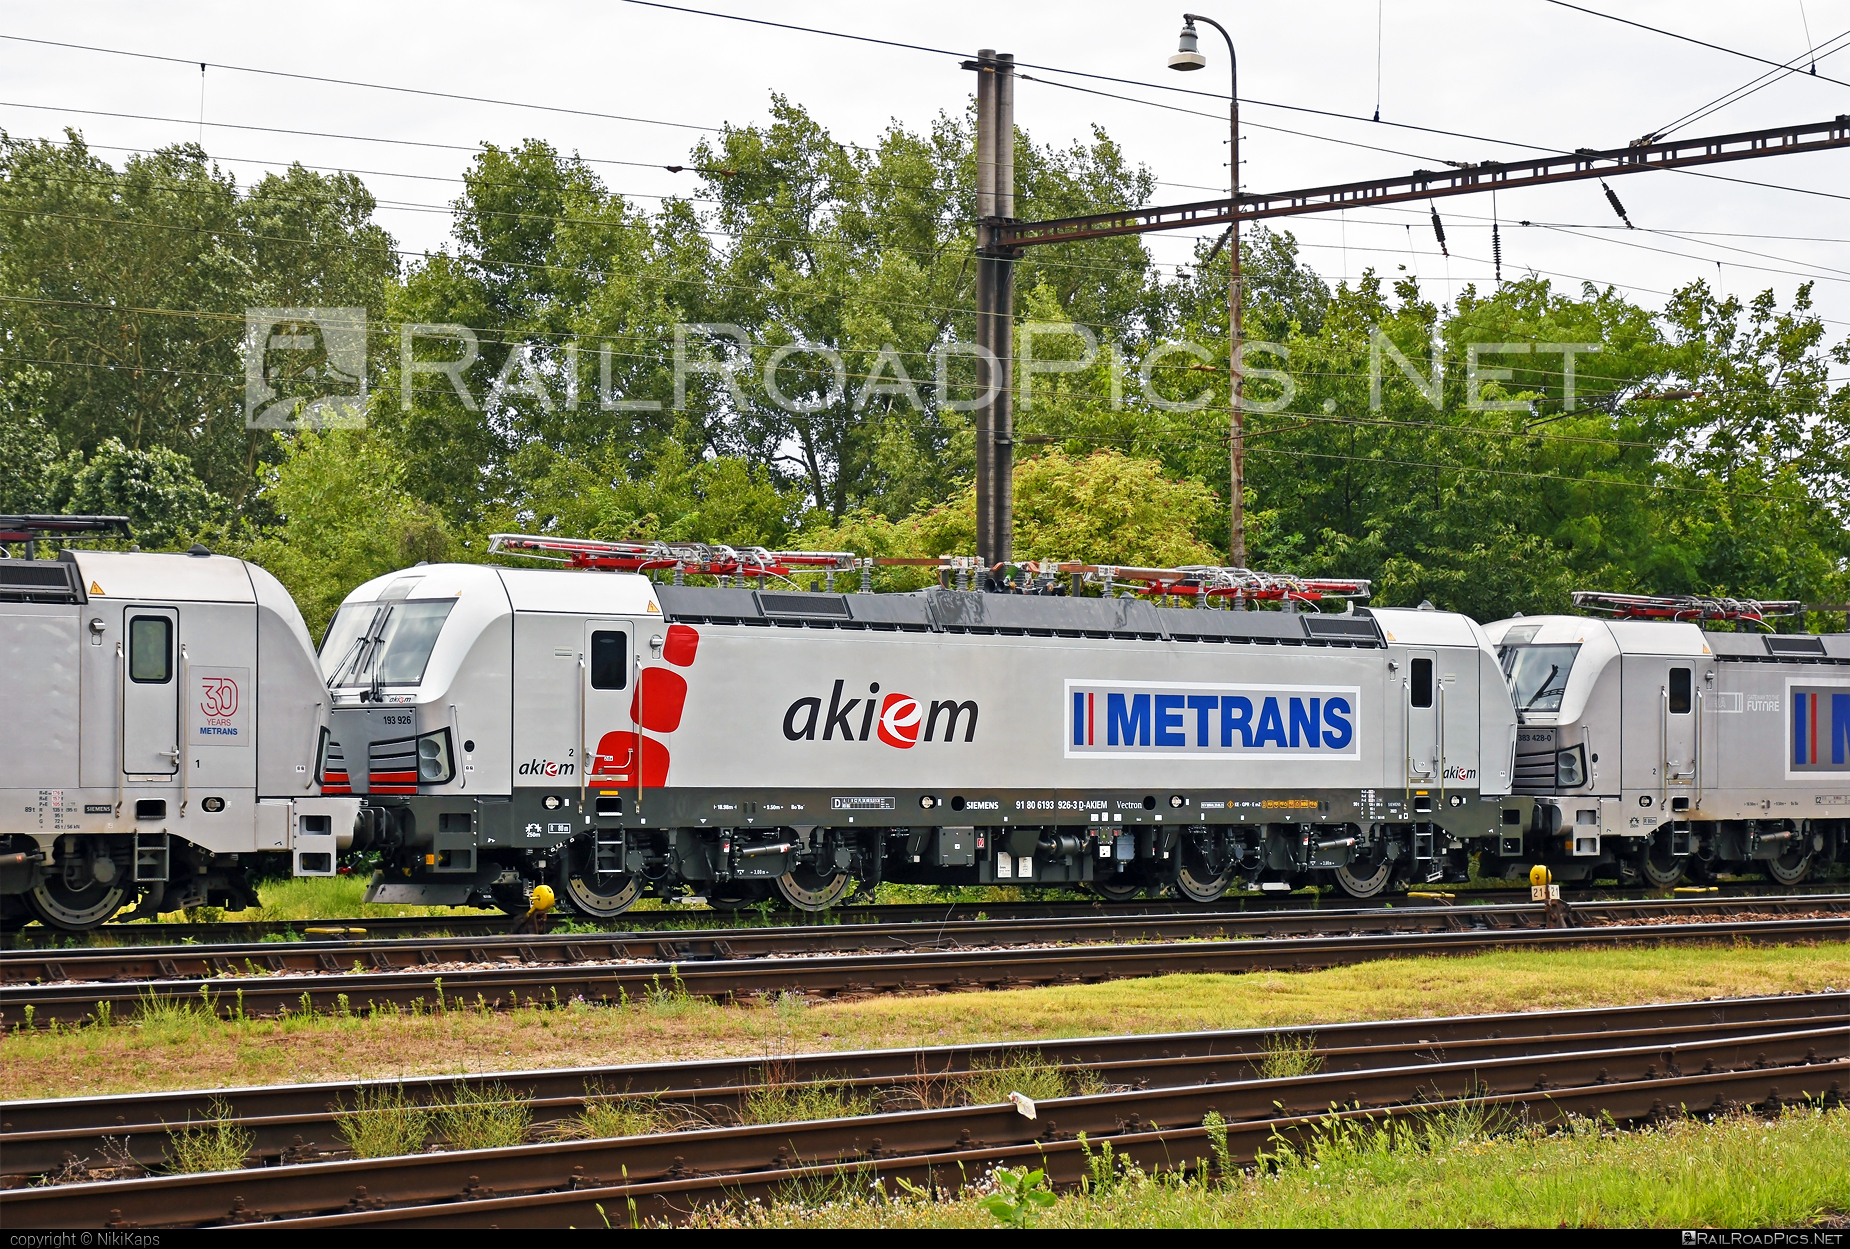 Siemens Vectron MS - 193 926 operated by METRANS, a.s. #akiem #akiemsas #hhla #metrans #siemens #siemensVectron #siemensVectronMS #vectron #vectronMS